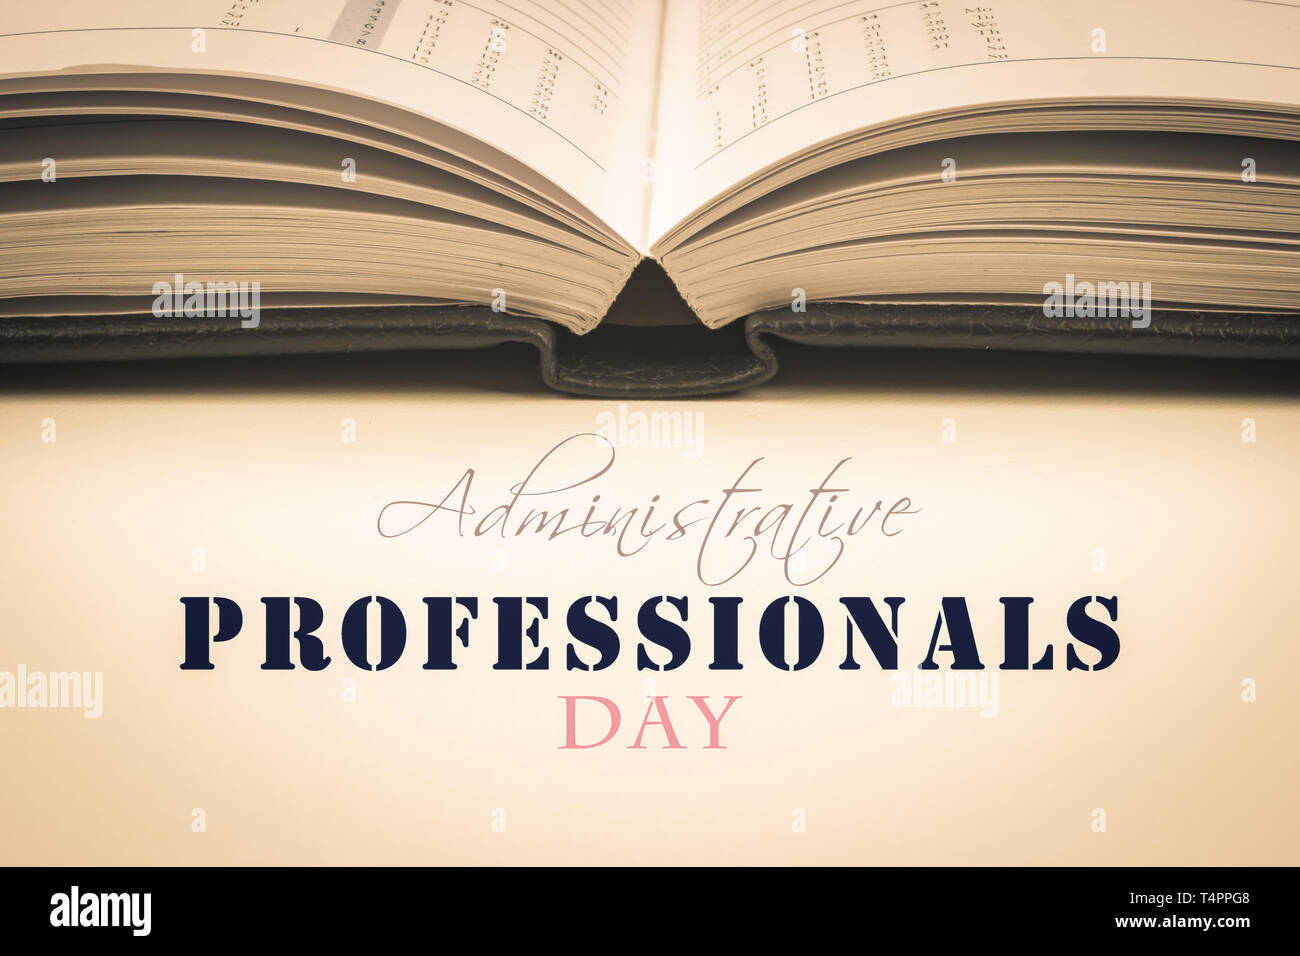 Administrative Professionals Day text card with open agenda. Vintage style. Stock Photo